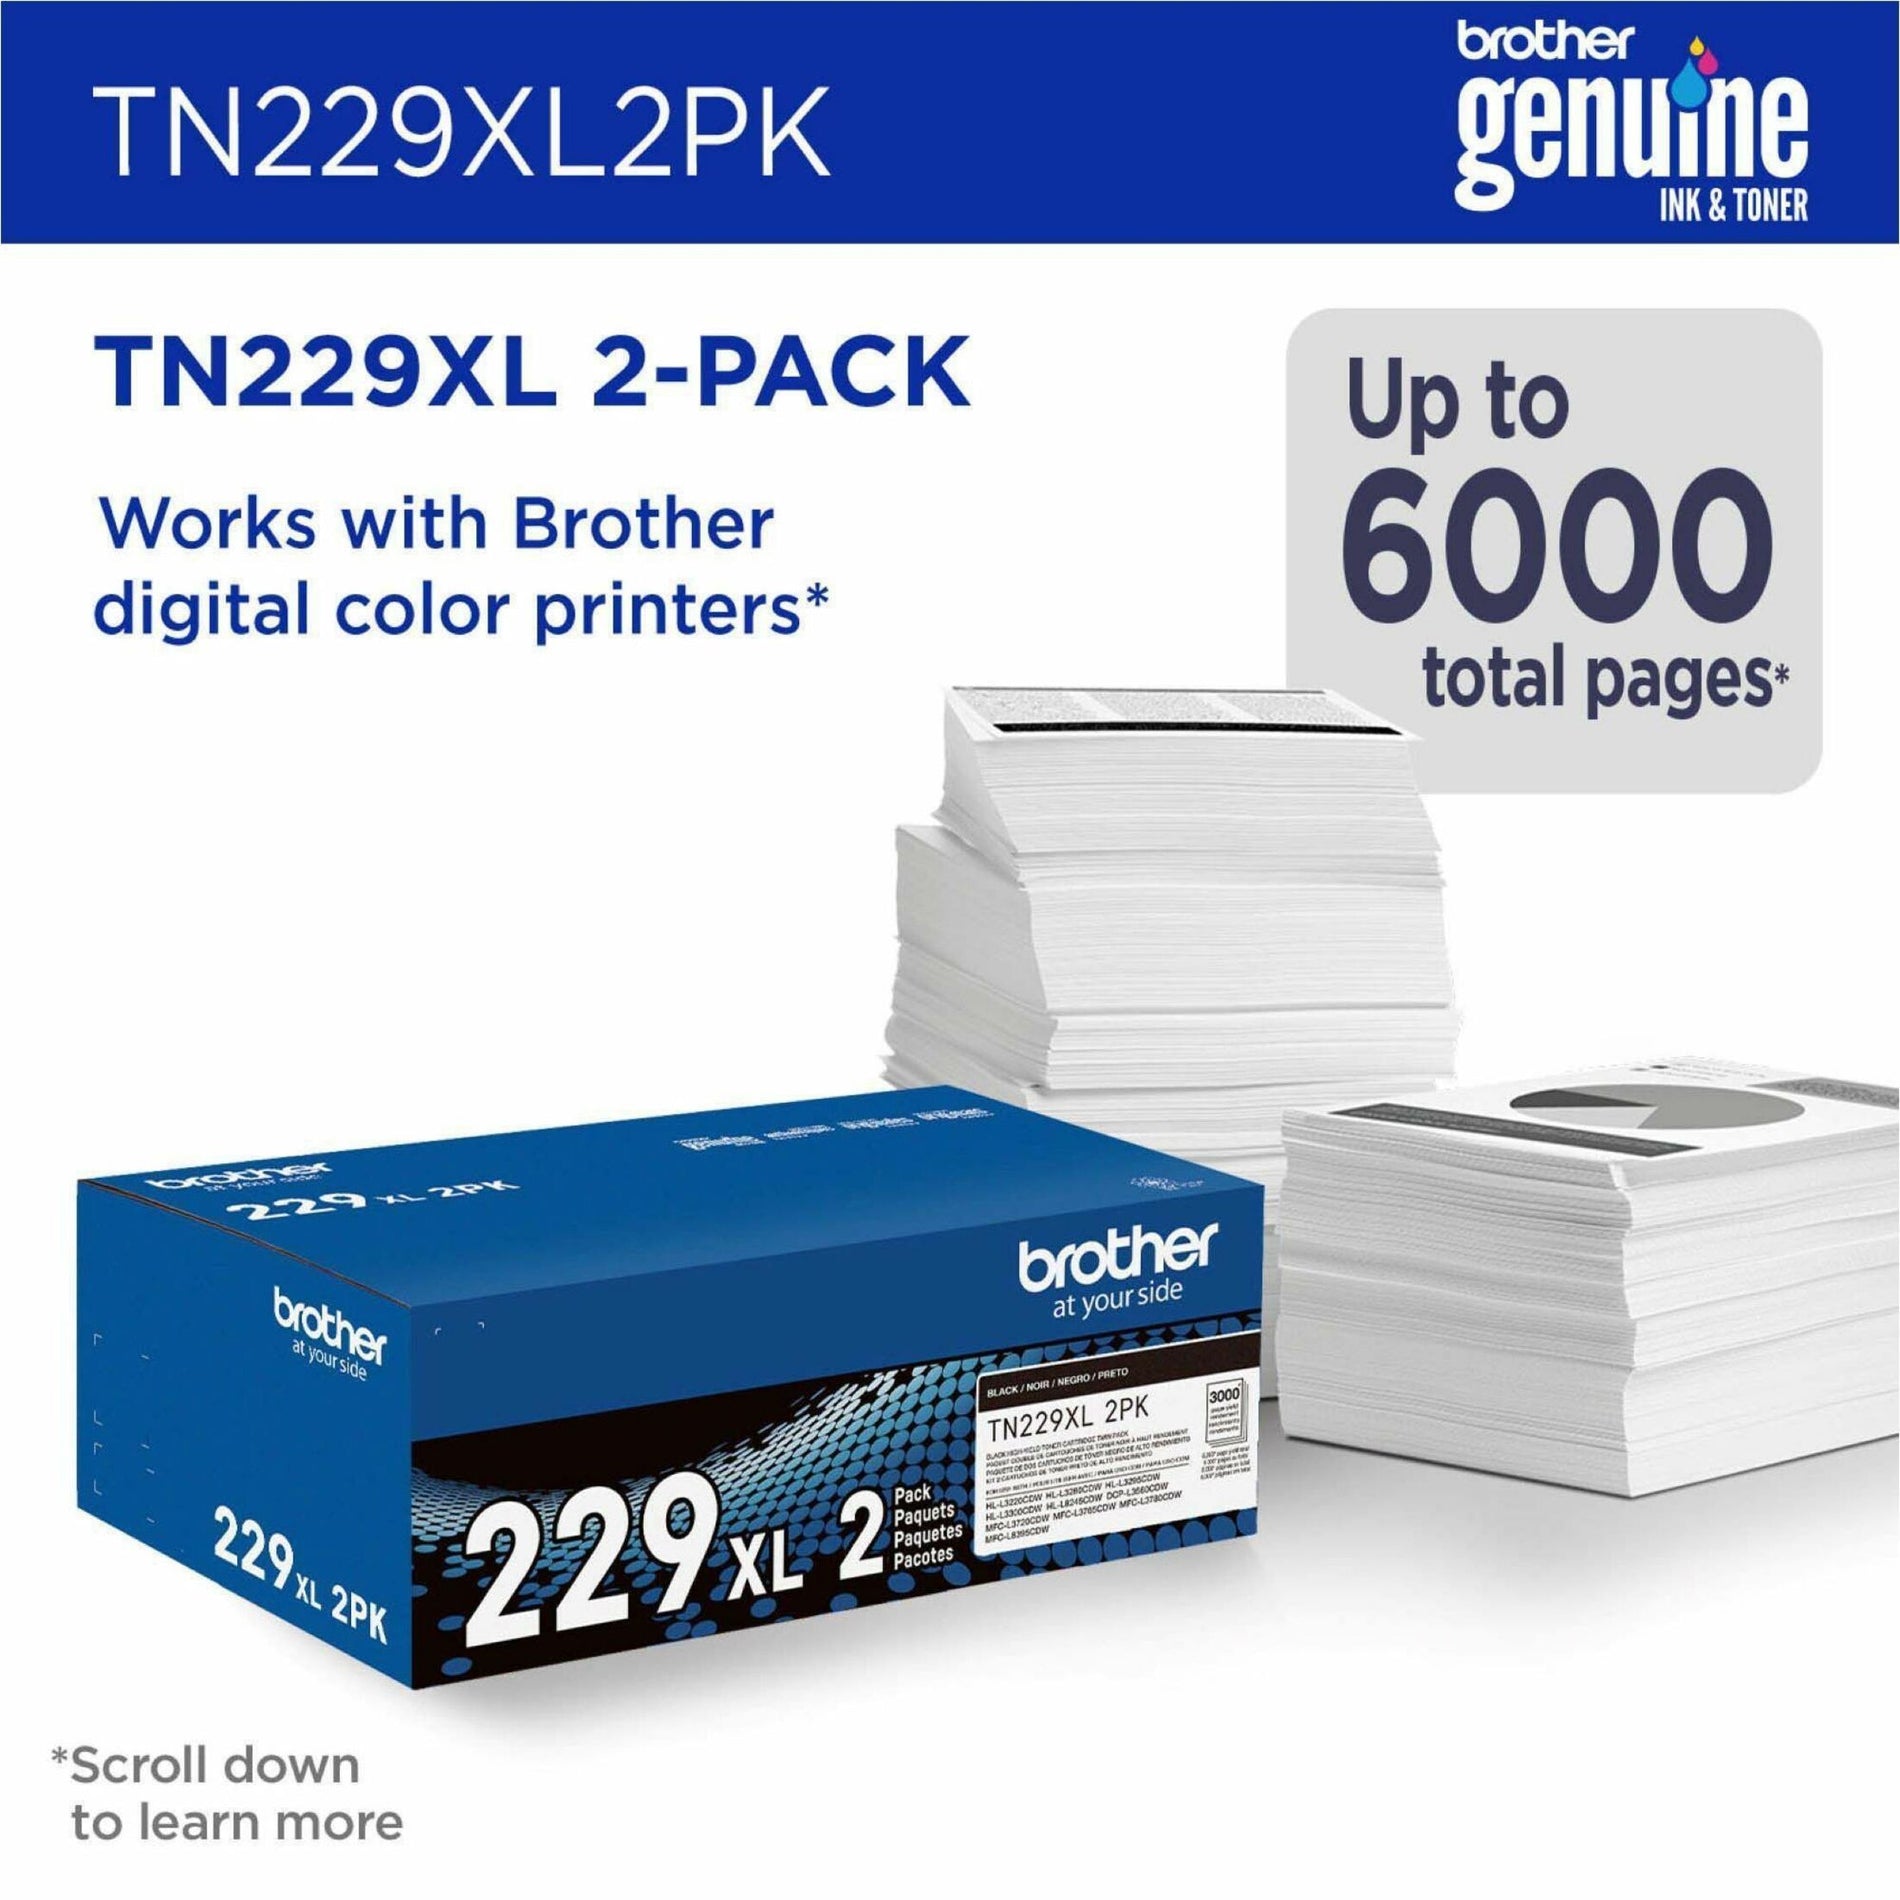 Brother TN229XL2PK High-yield Black Toner Cartridge Twin-Pack, for Brother Printers